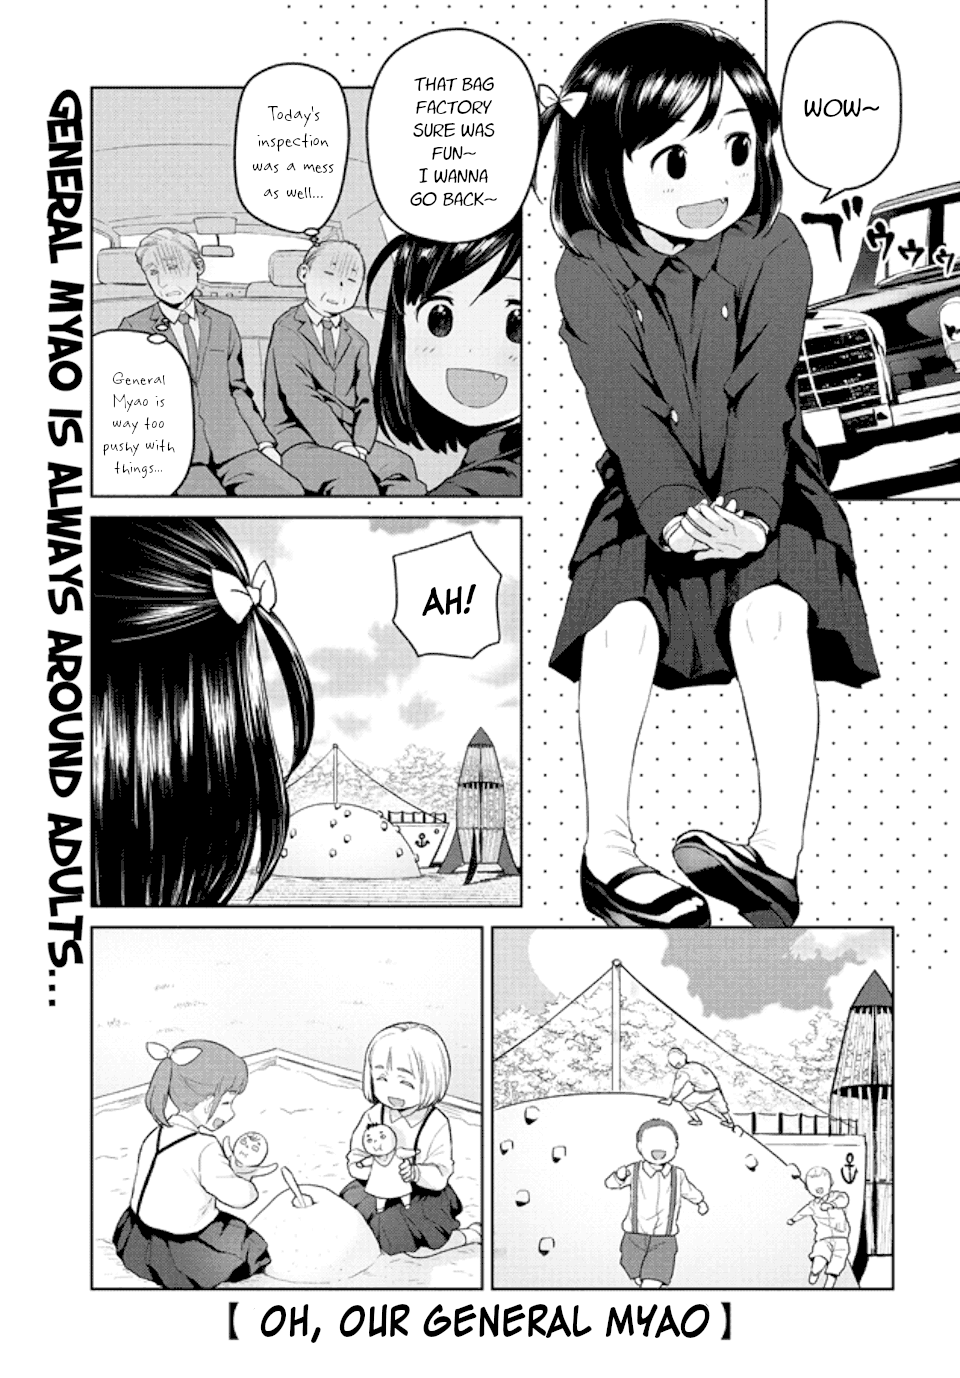 Oh, Our General Myao Vol.1 Chapter 3: In Which Myao Visits A Park - Picture 1